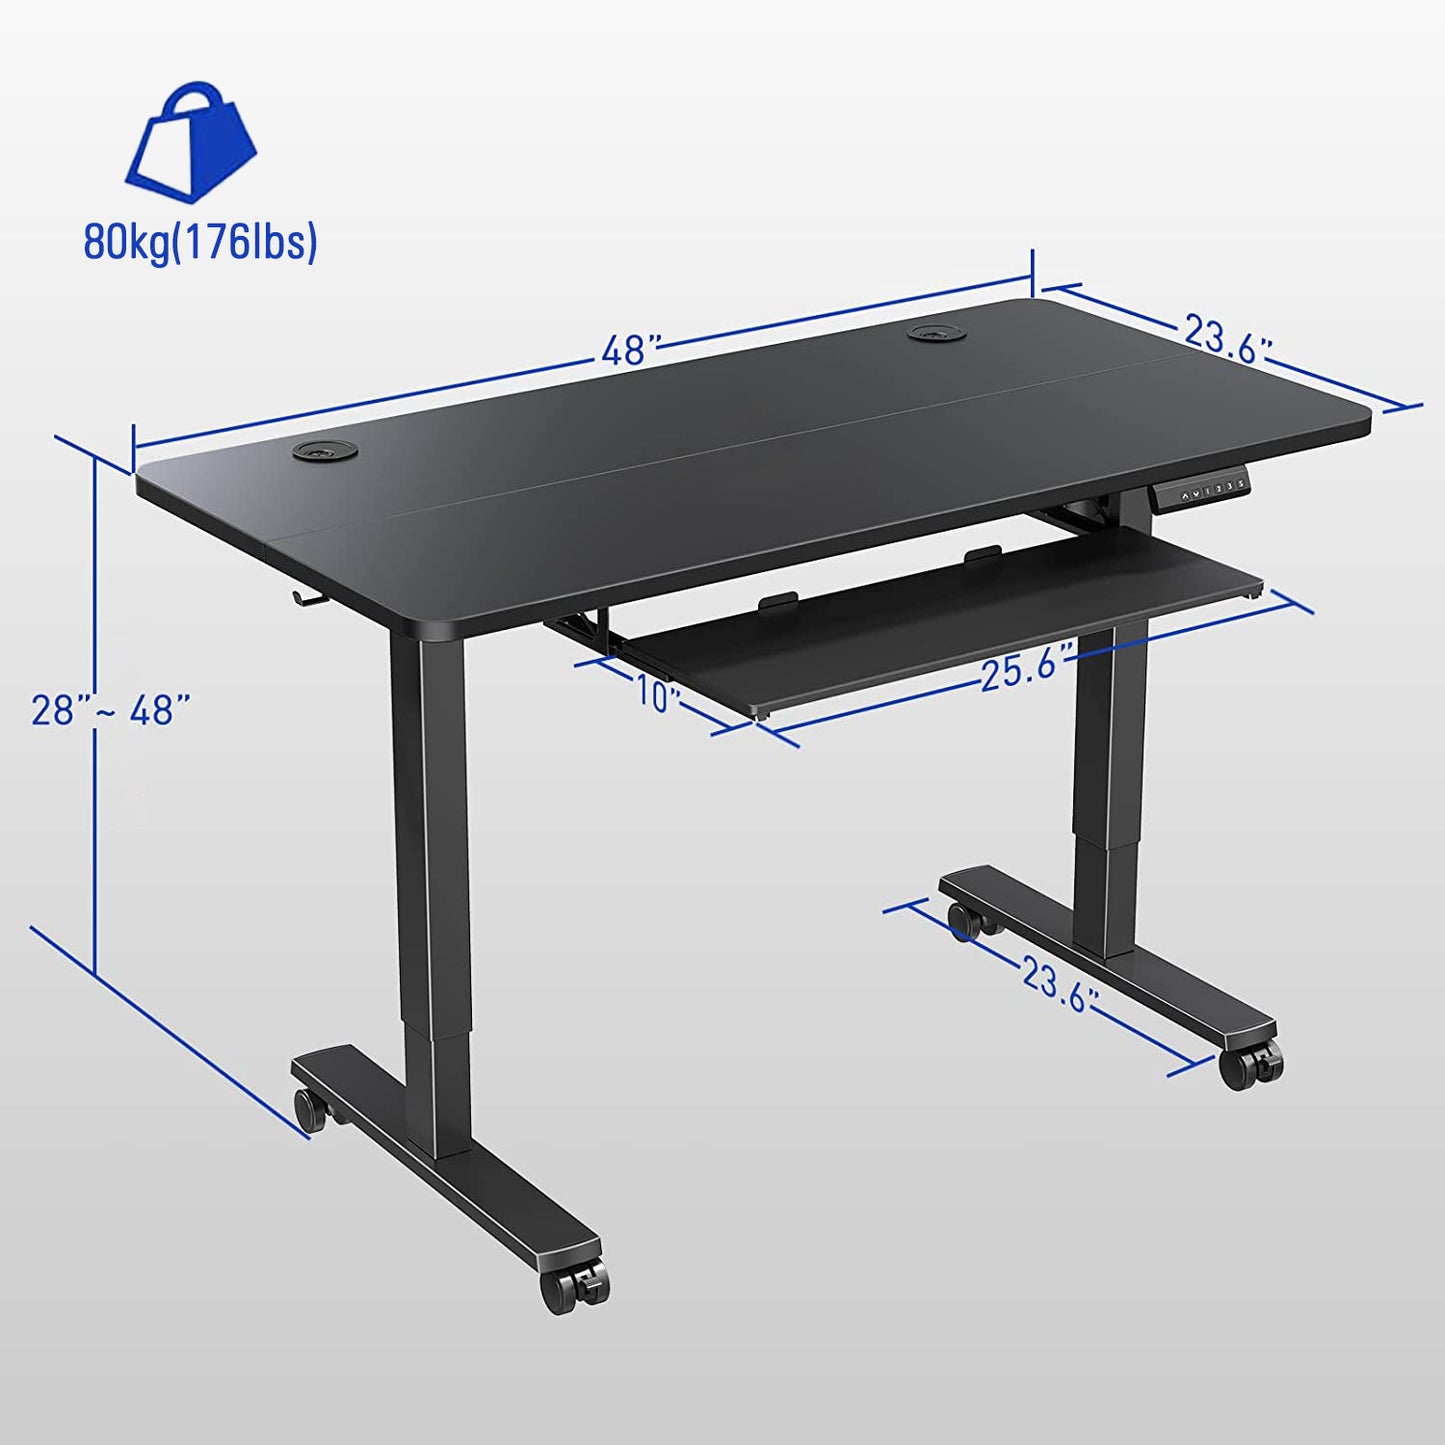 Electric Standing Desk for Home Office